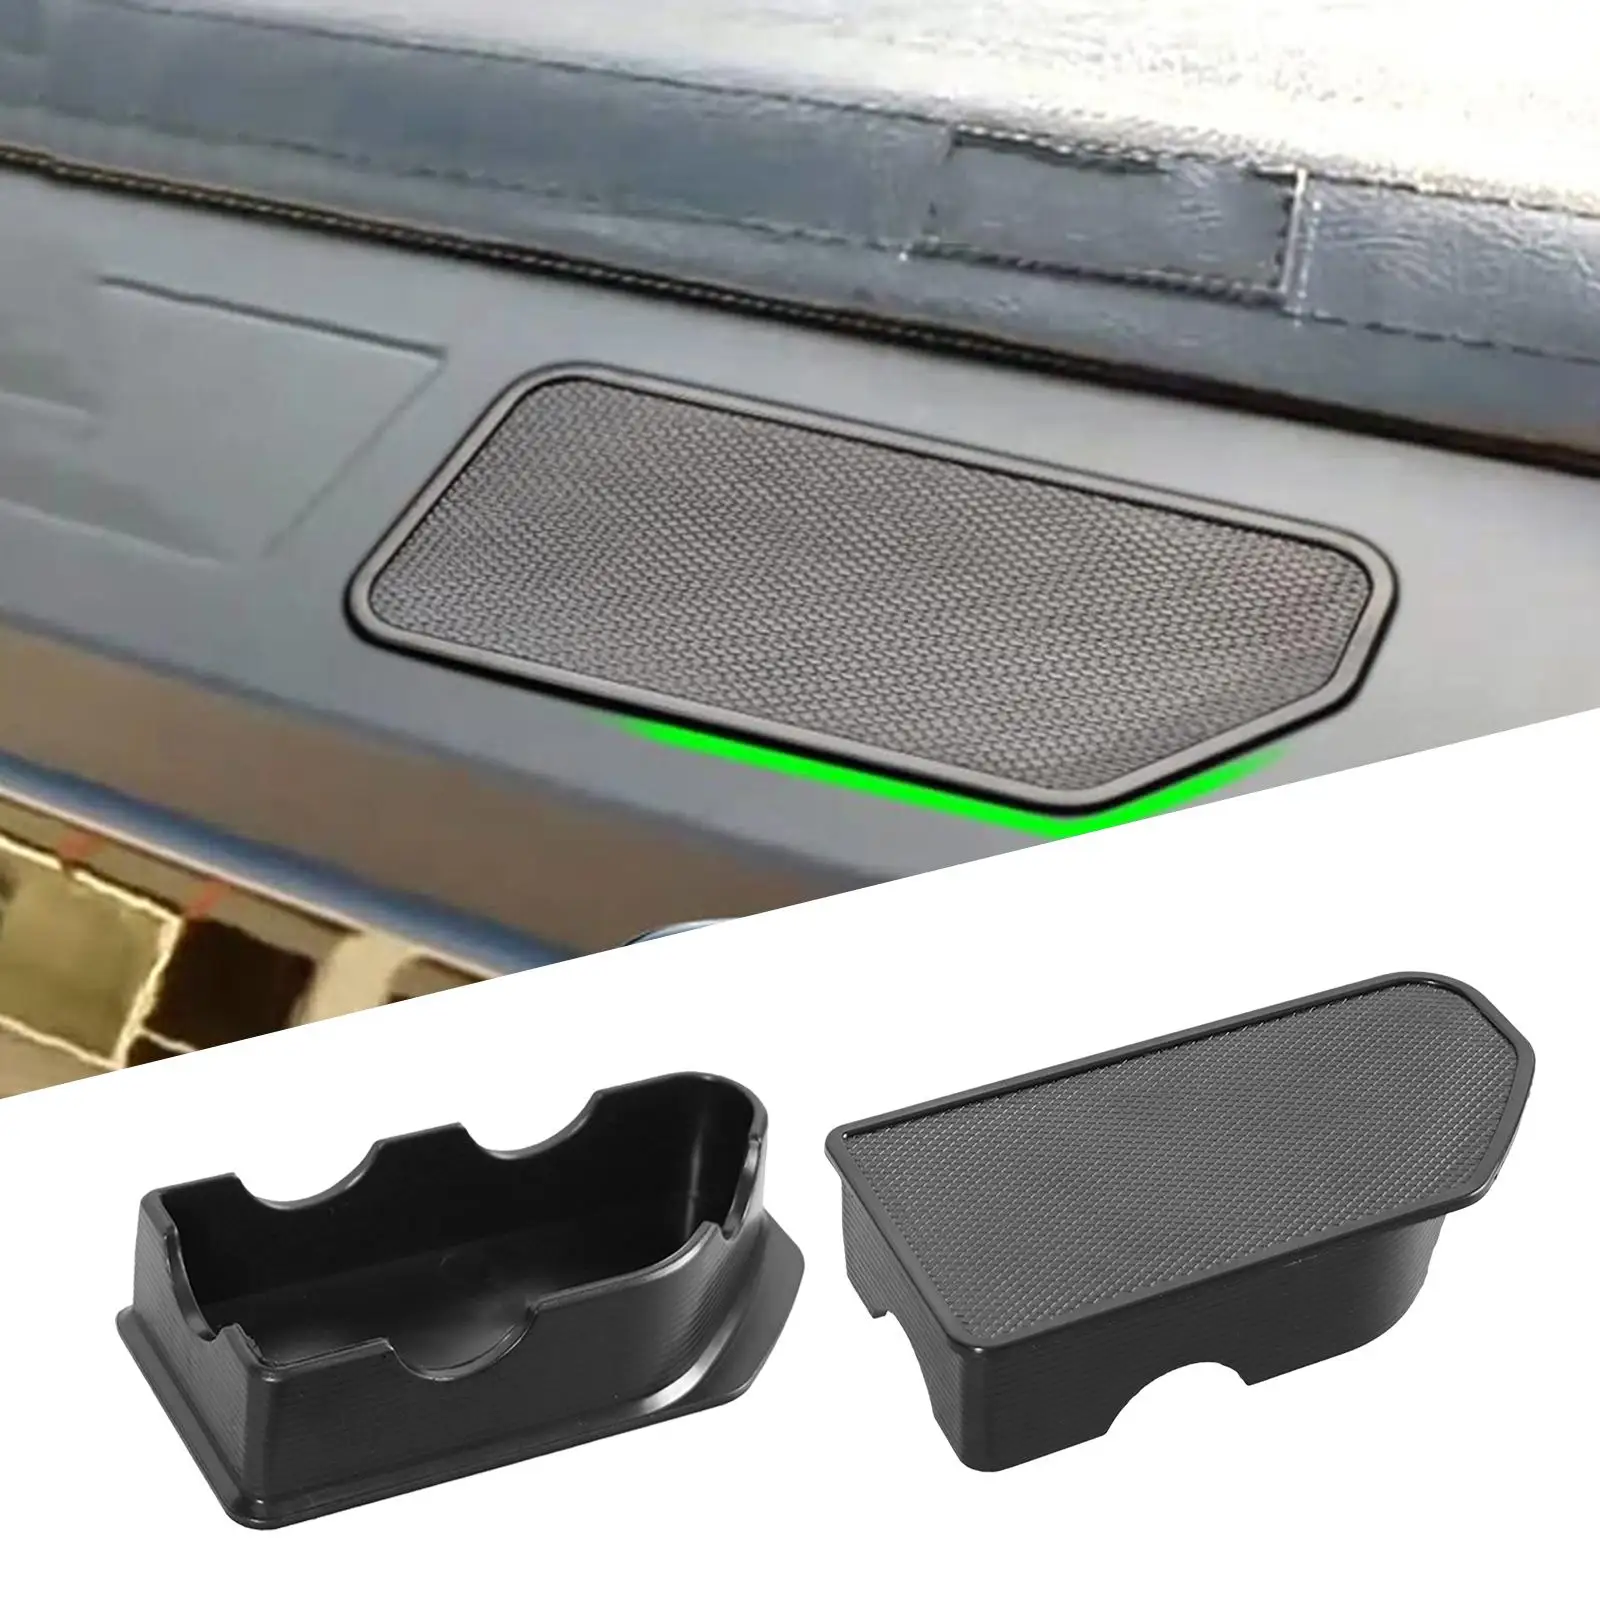 2 Pieces Bed Rail Stake Pocket Covers Fit for  RAM 1500 2019-2021